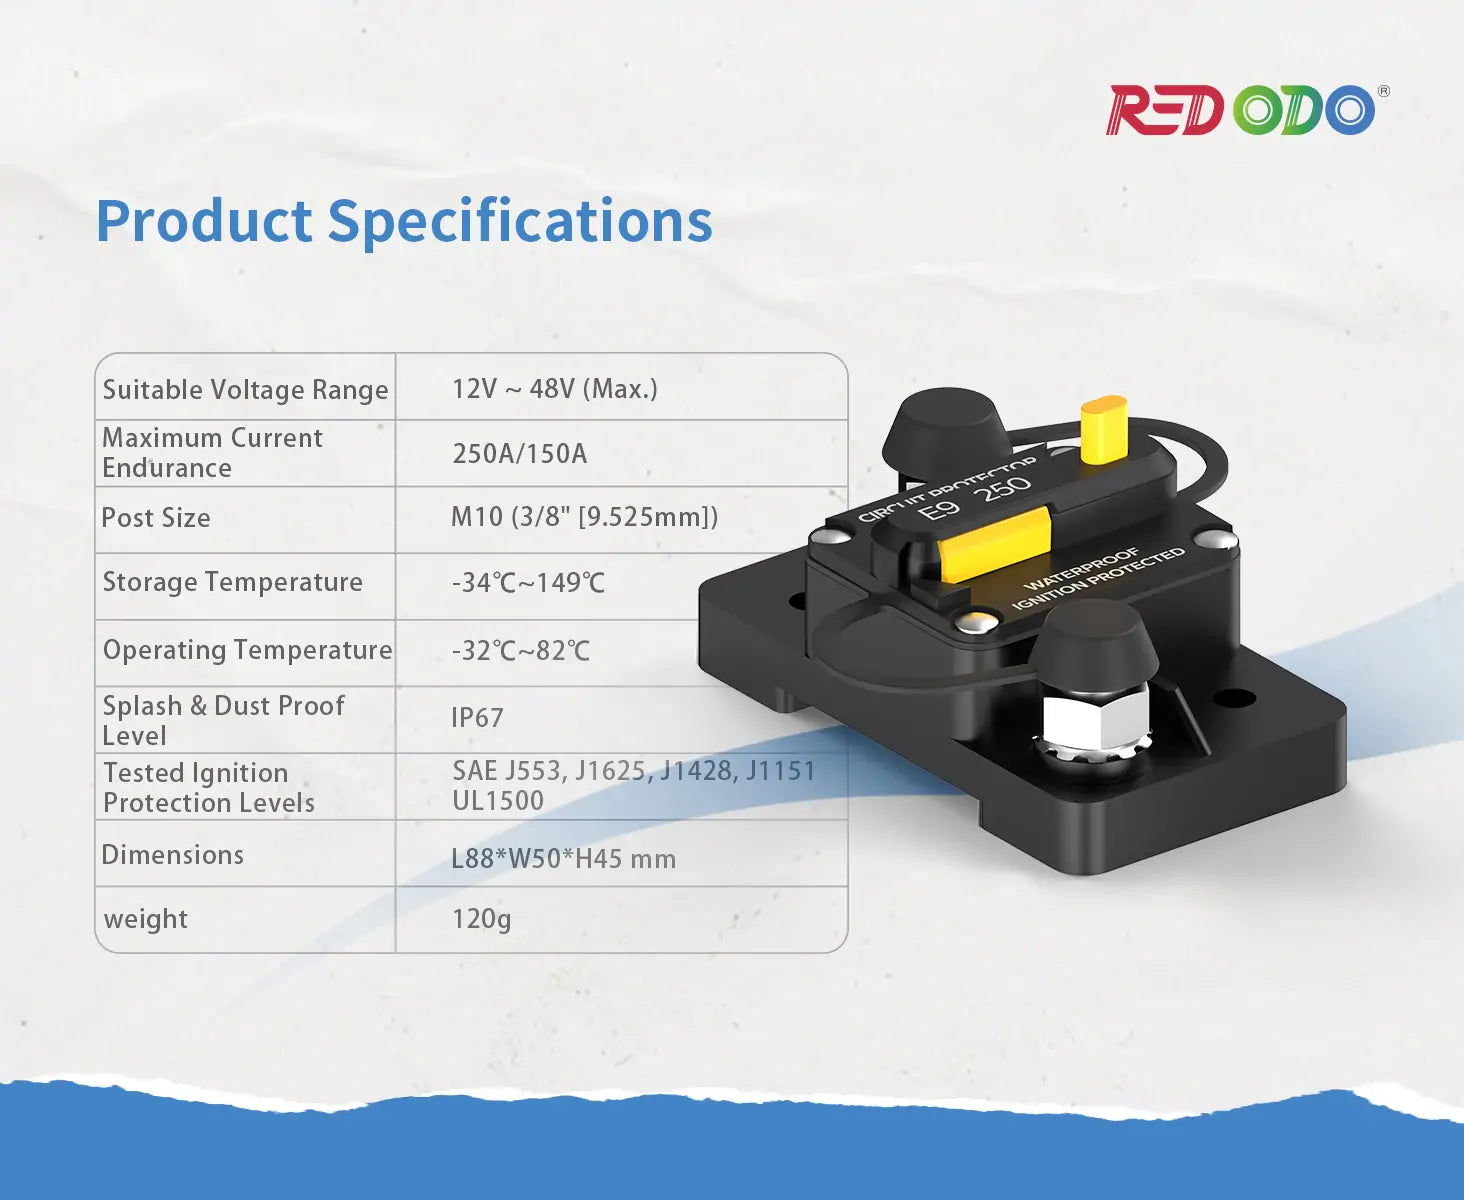 Redodo Switchable  250A Circuit Breaker